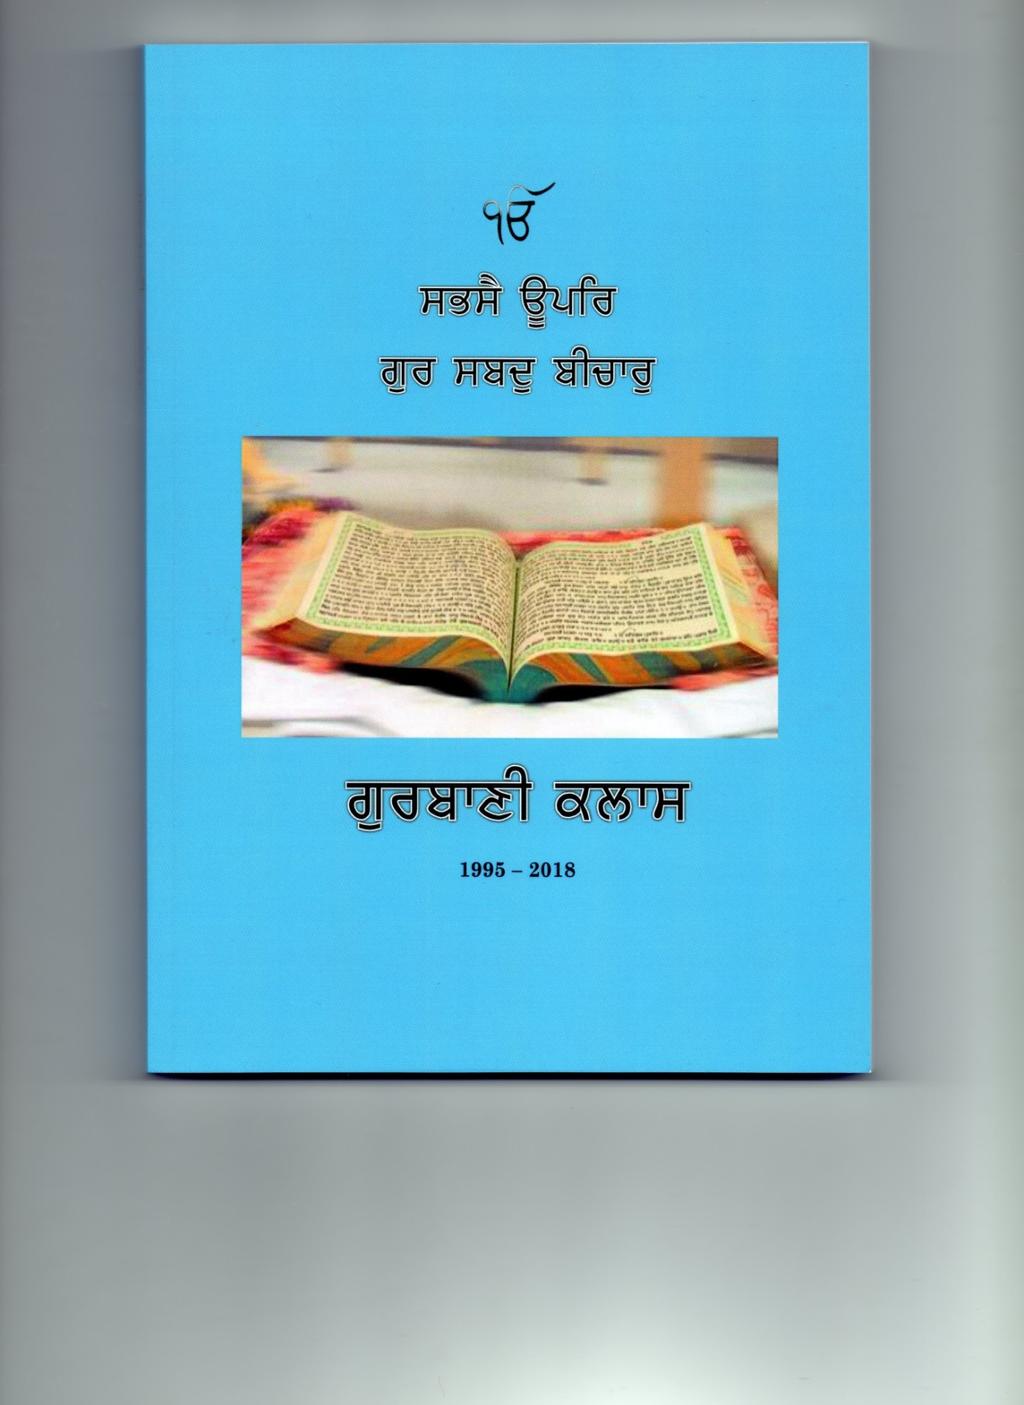 Gurbani Class Book For Sale Most of the material posted on the